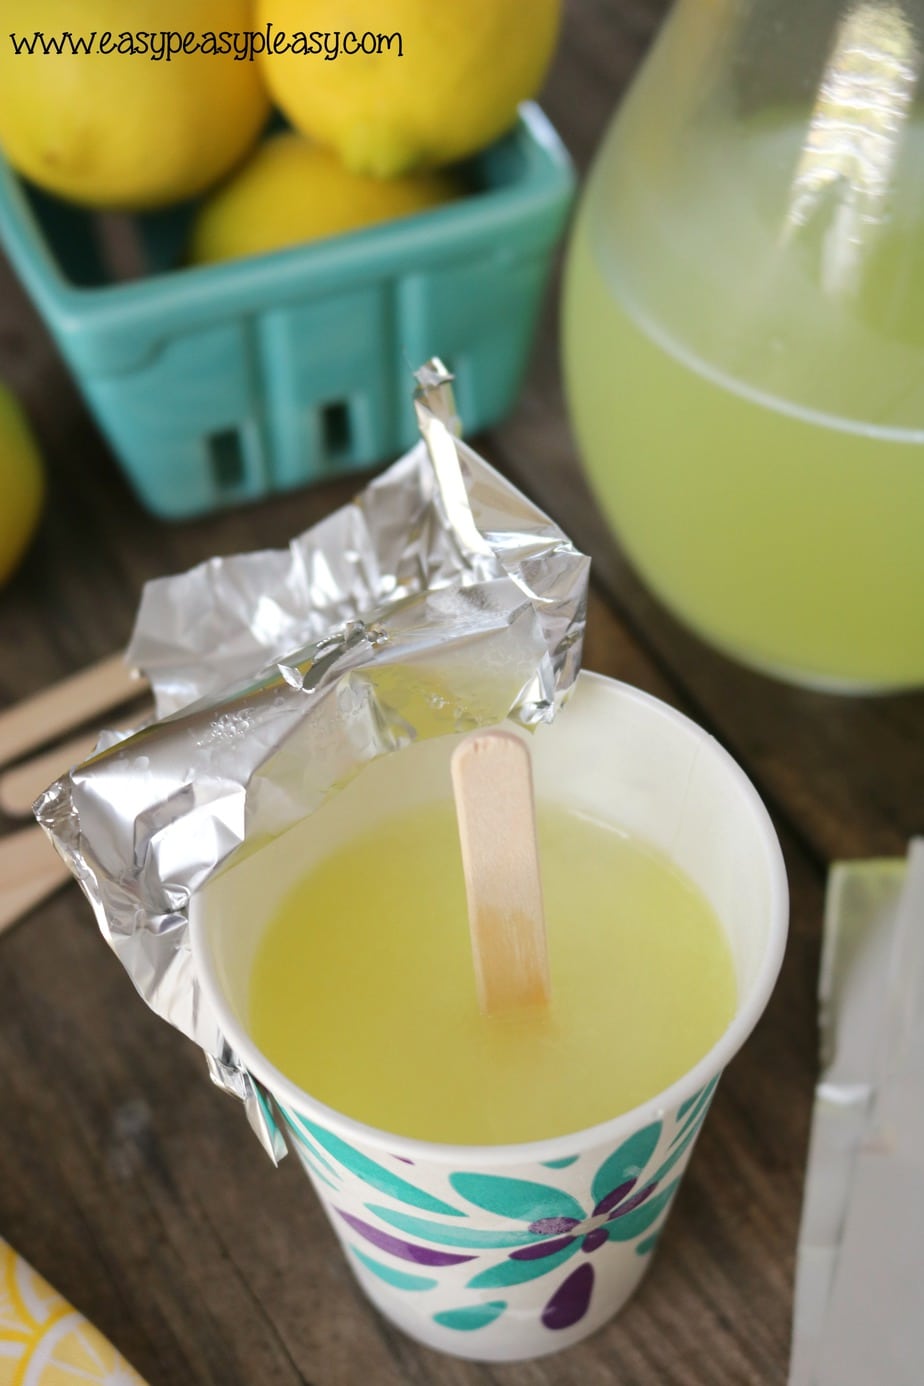 Follow these steps to make super easy and refreshingly delicious homemade lemonade Popsicle. Step 6 to homemade popsicles in a cup.